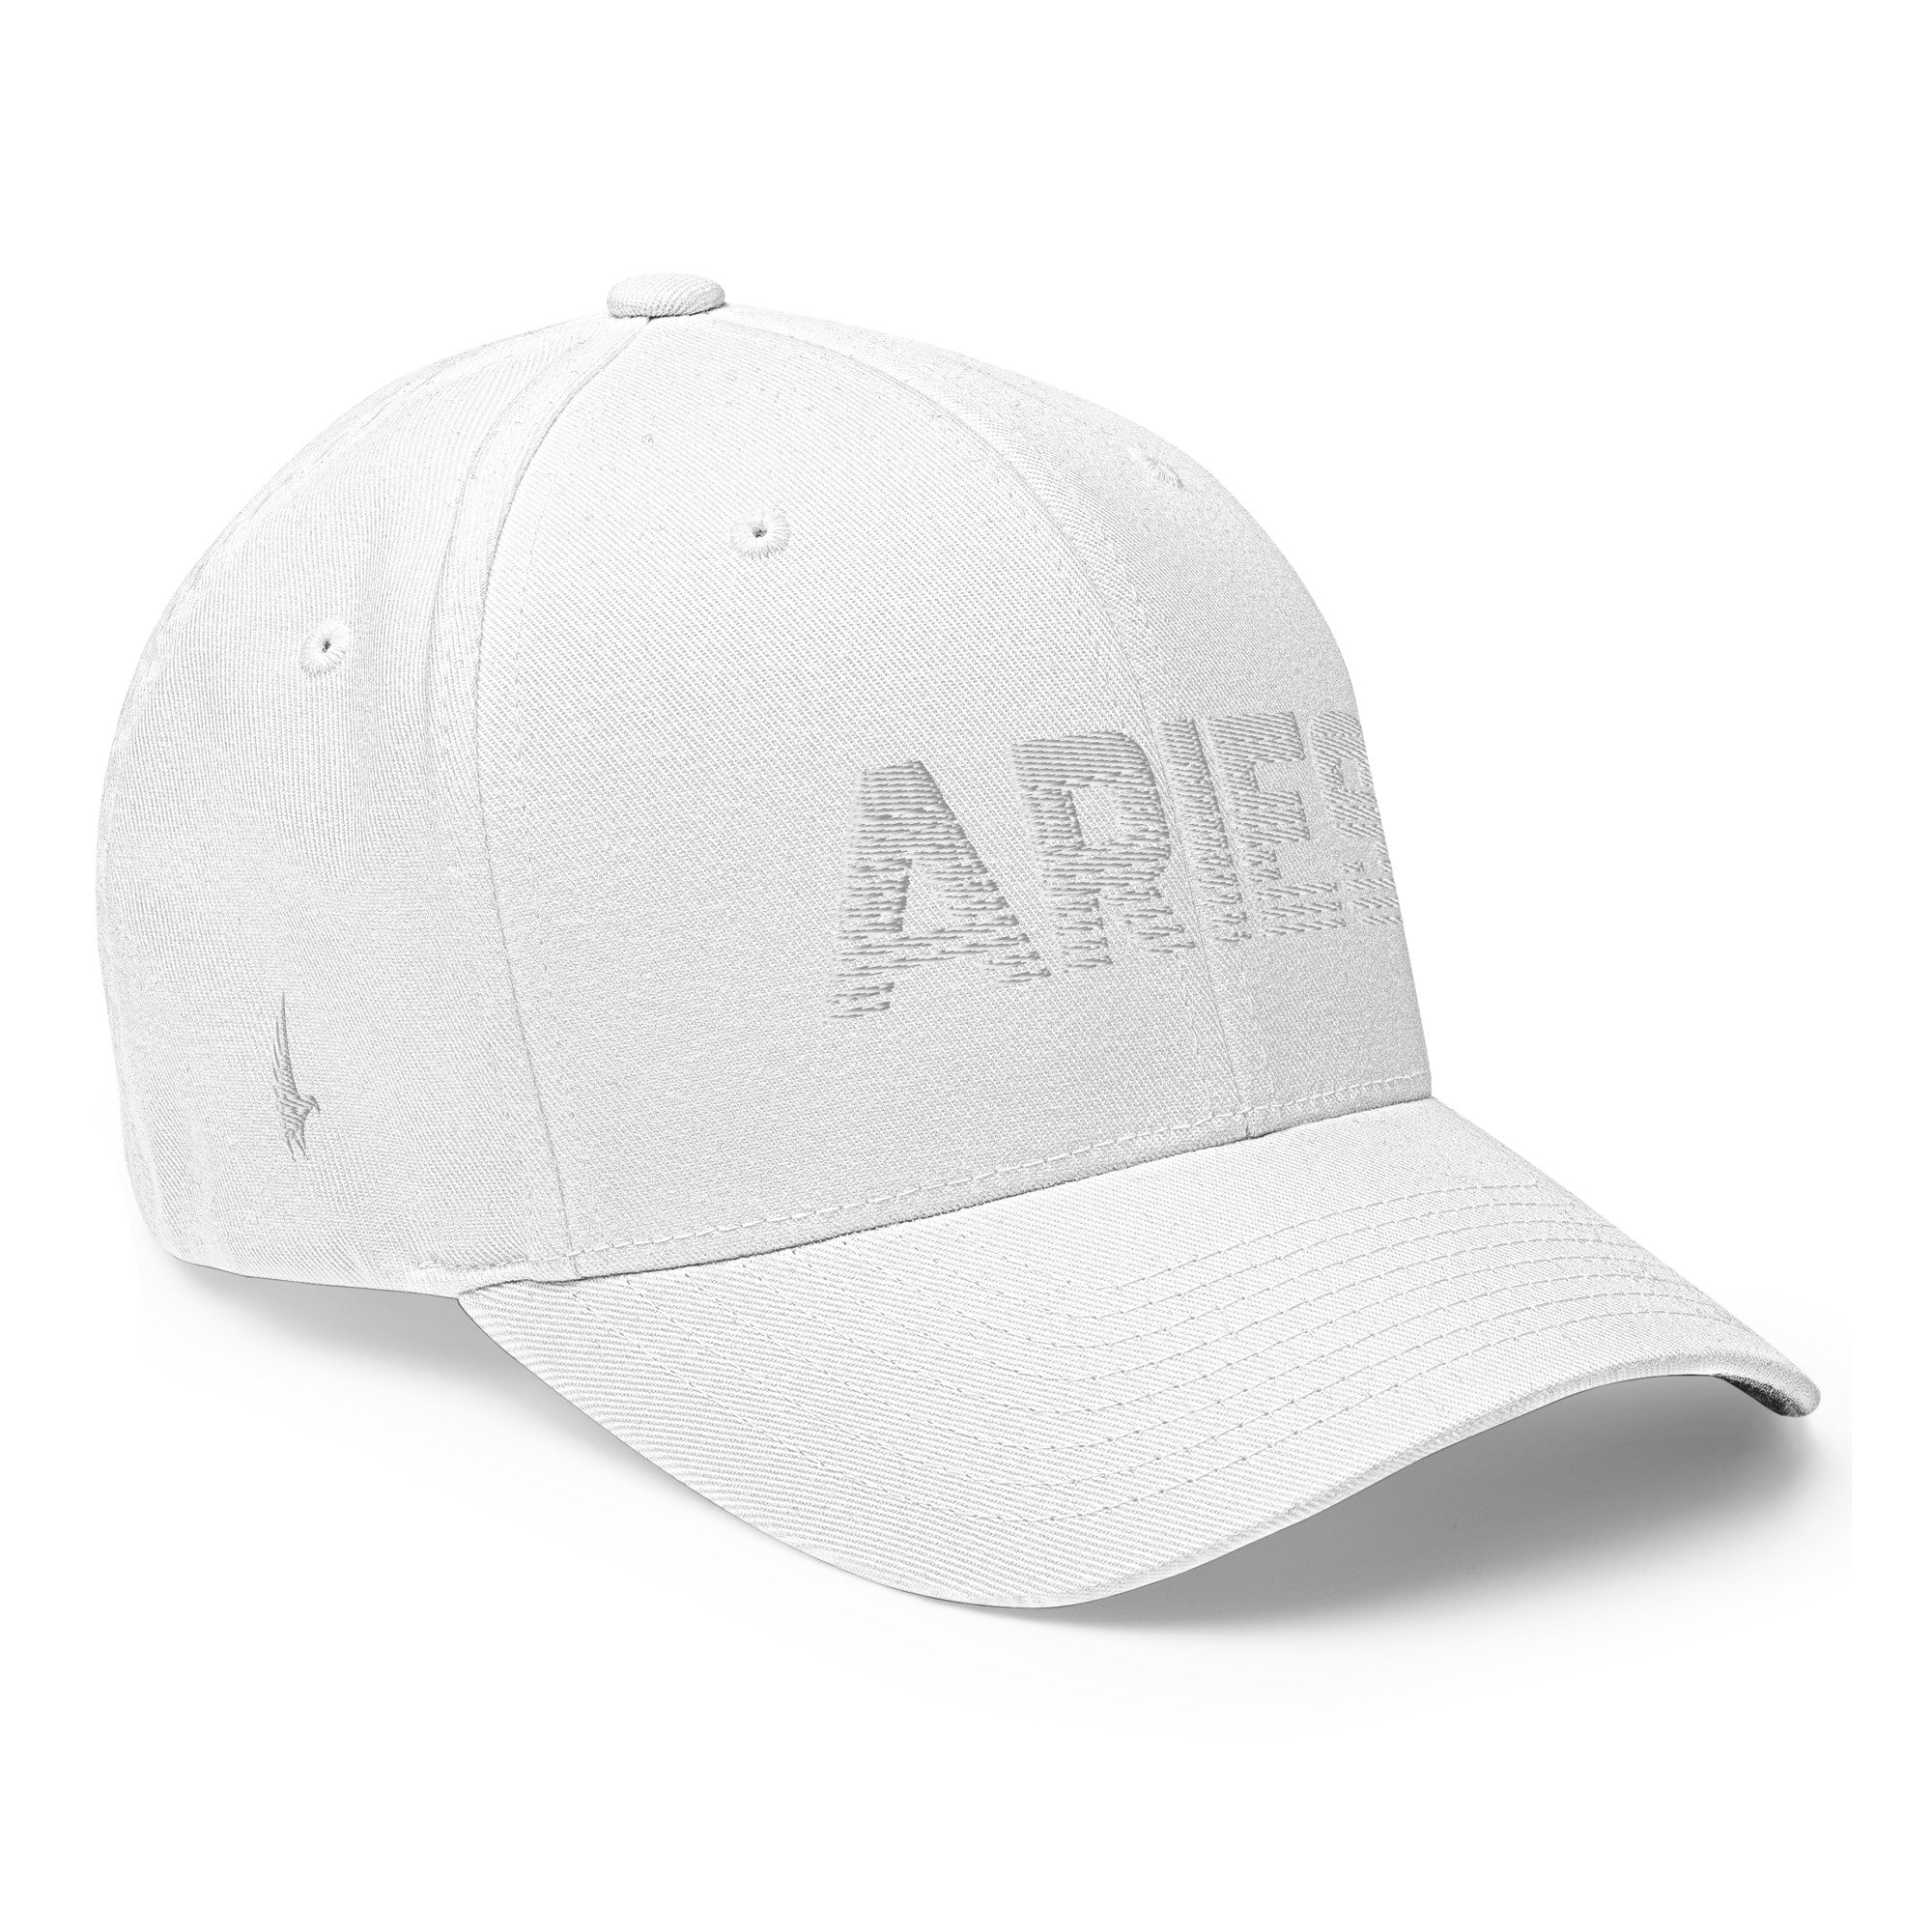 Aries Fitted Hat - White/White Fitted - Loyalty Vibes